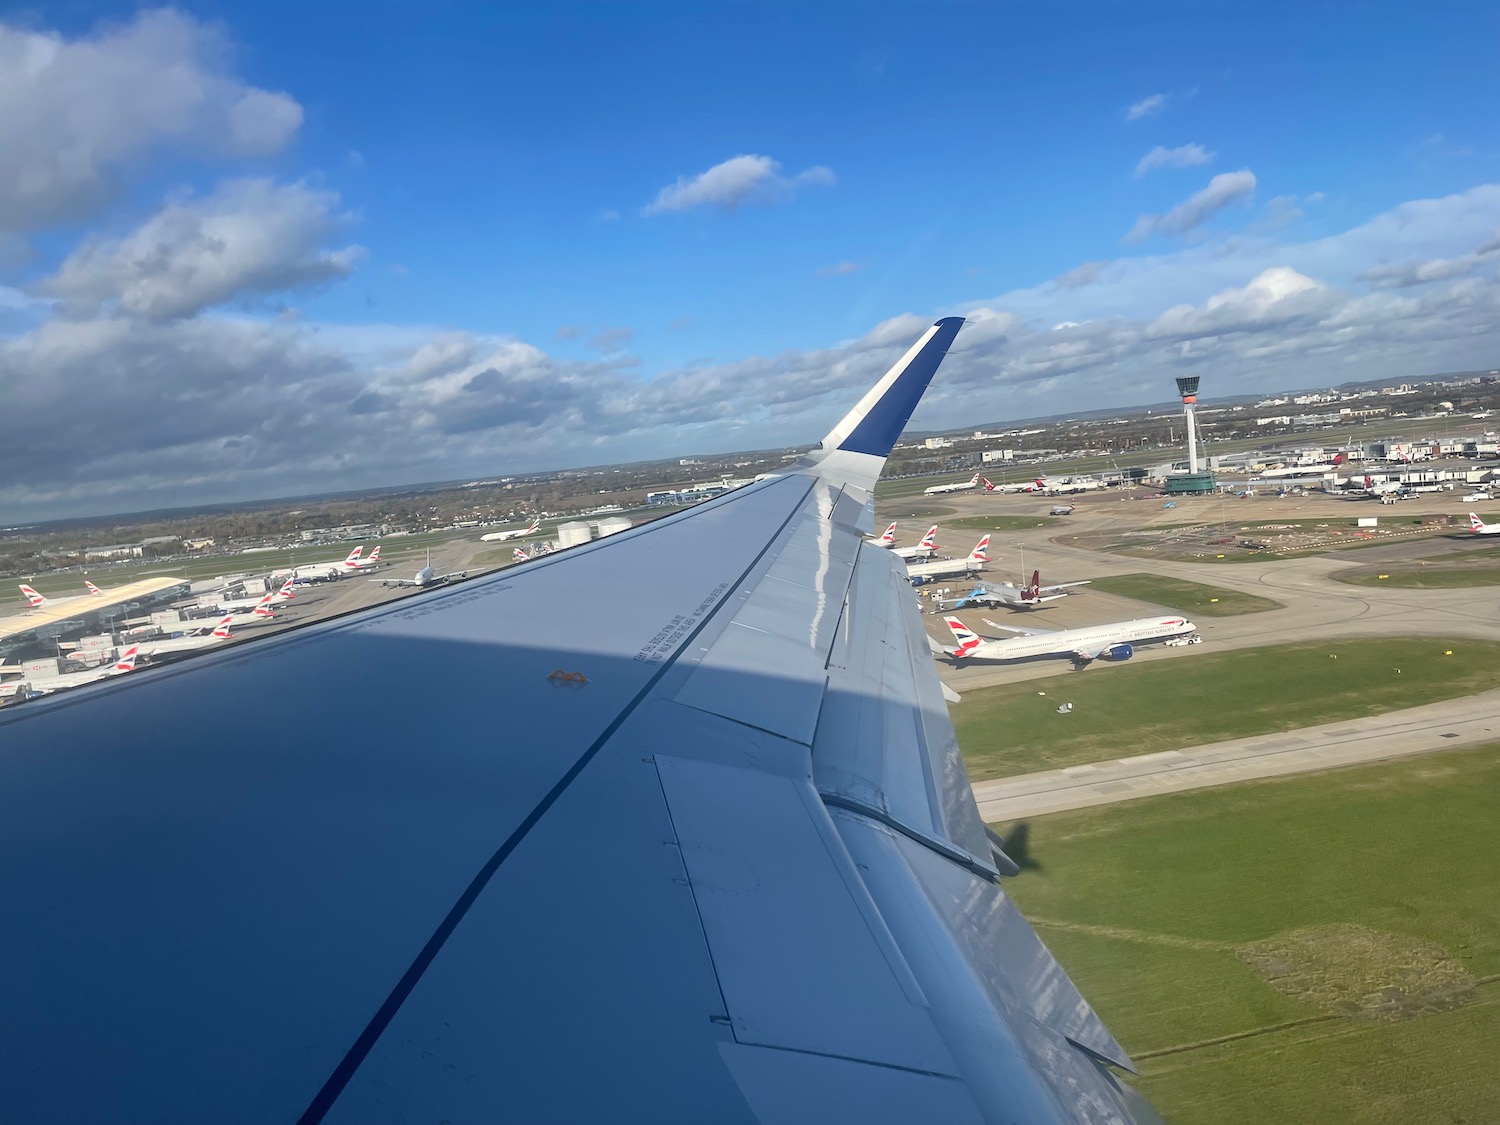 an airplane wing and runway with many airplanes in the background